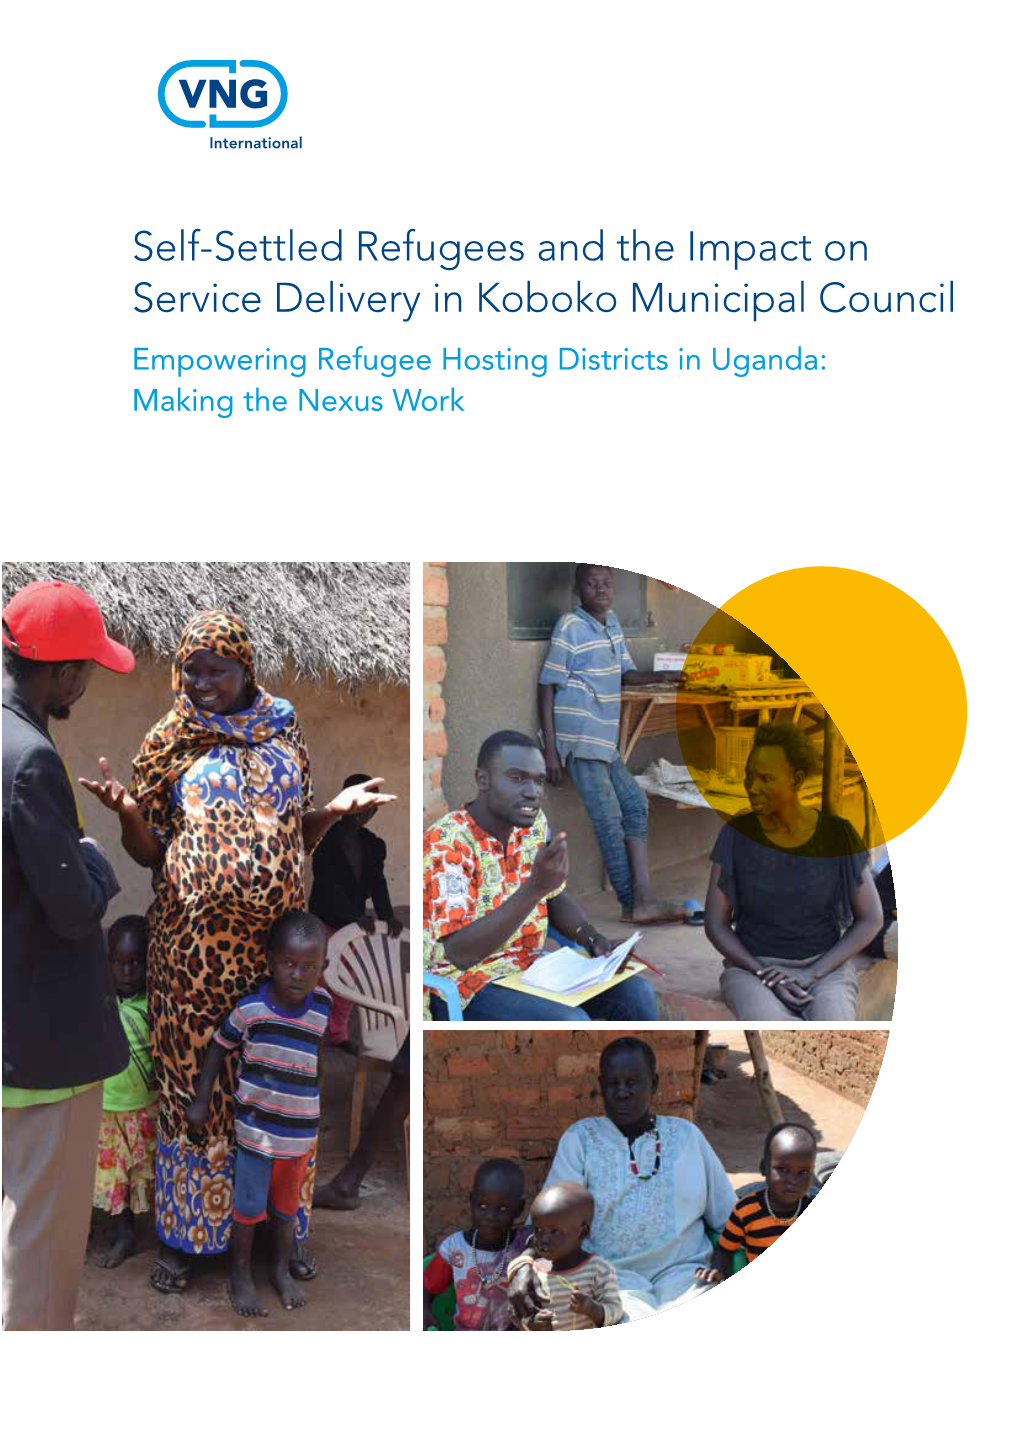 Self-Settled Refugees and the Impact on Service Delivery in Koboko